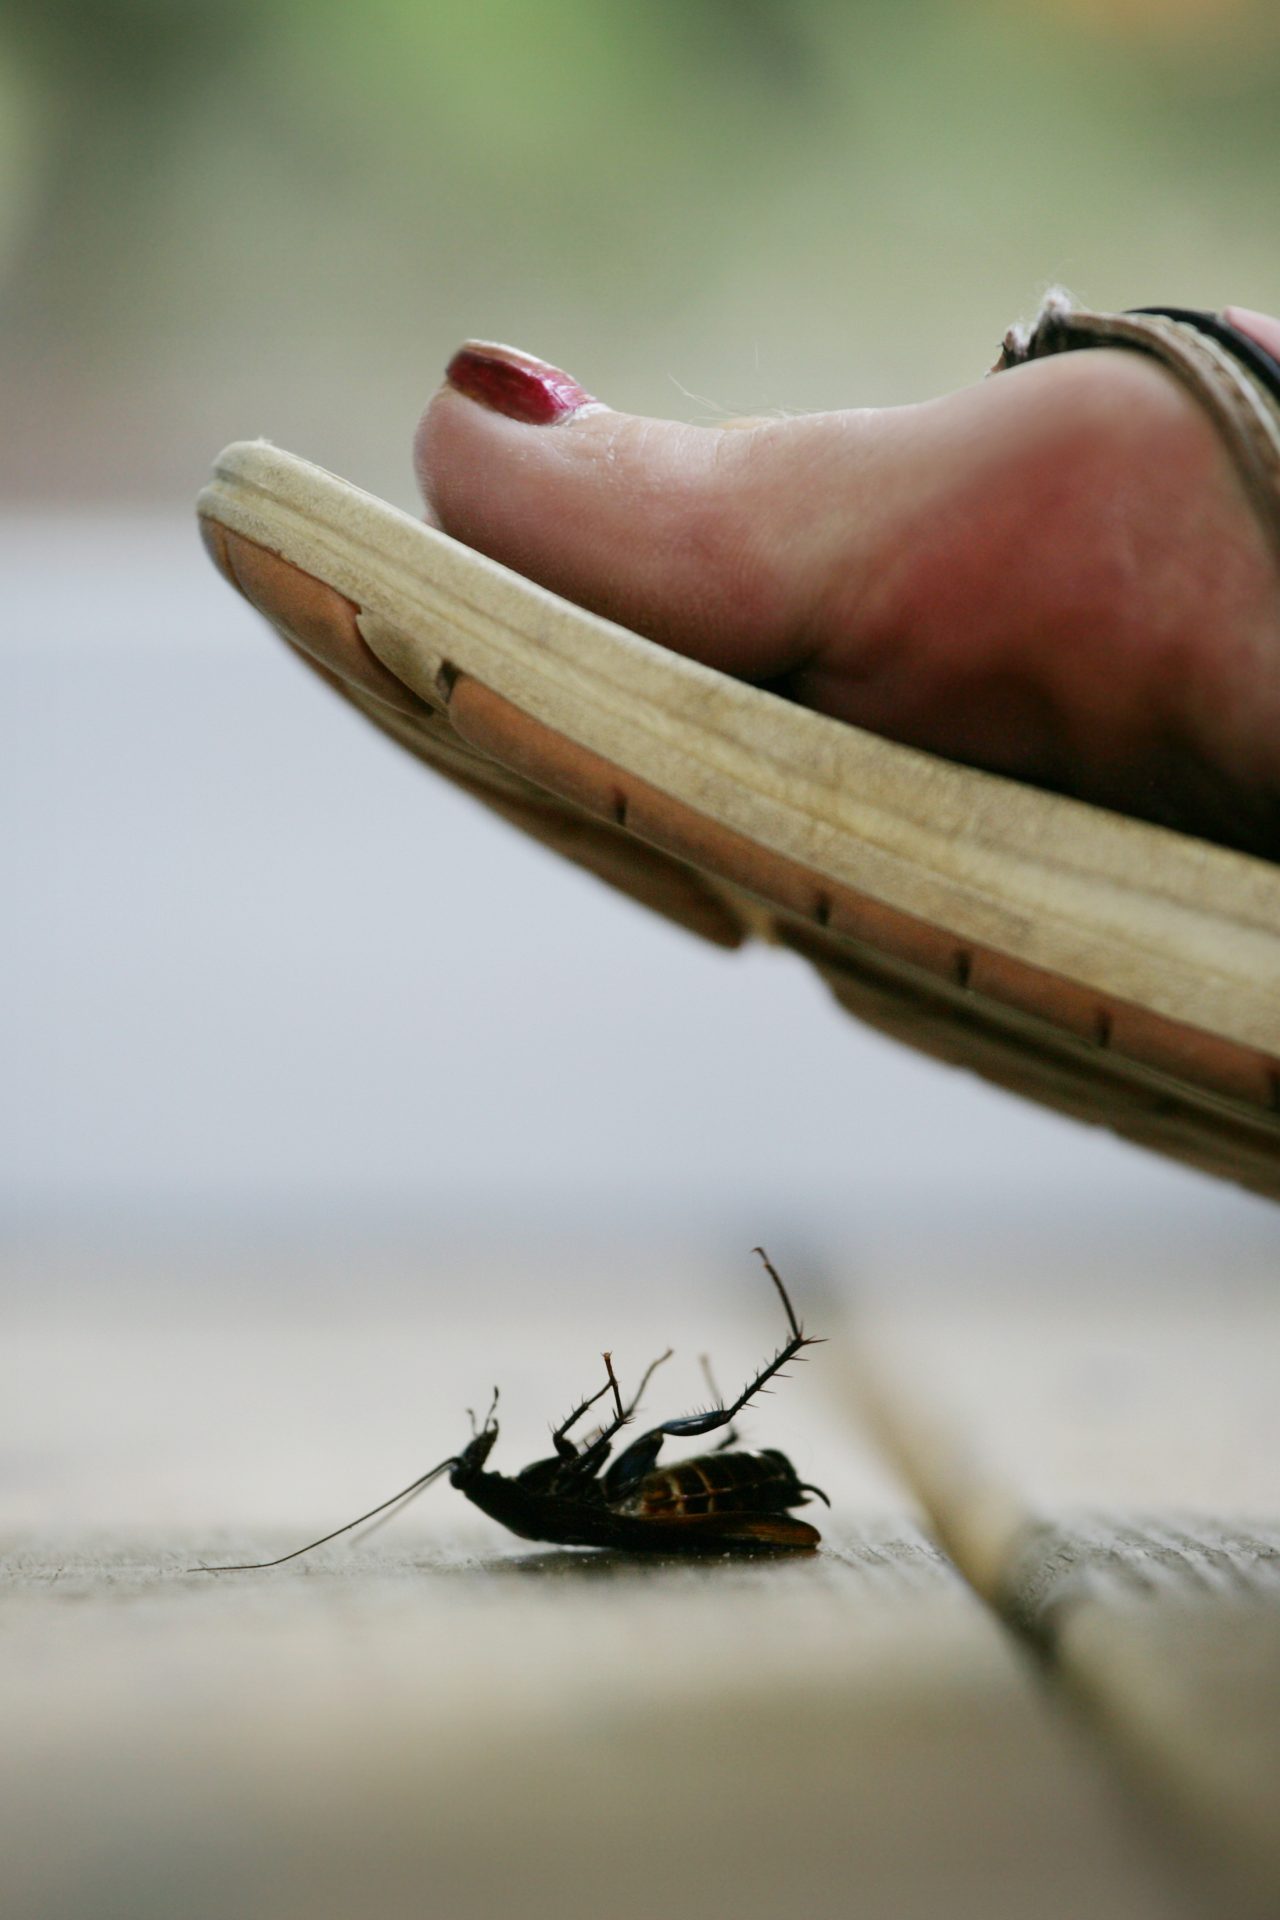 There are hidden health risks to squishing a cockroach